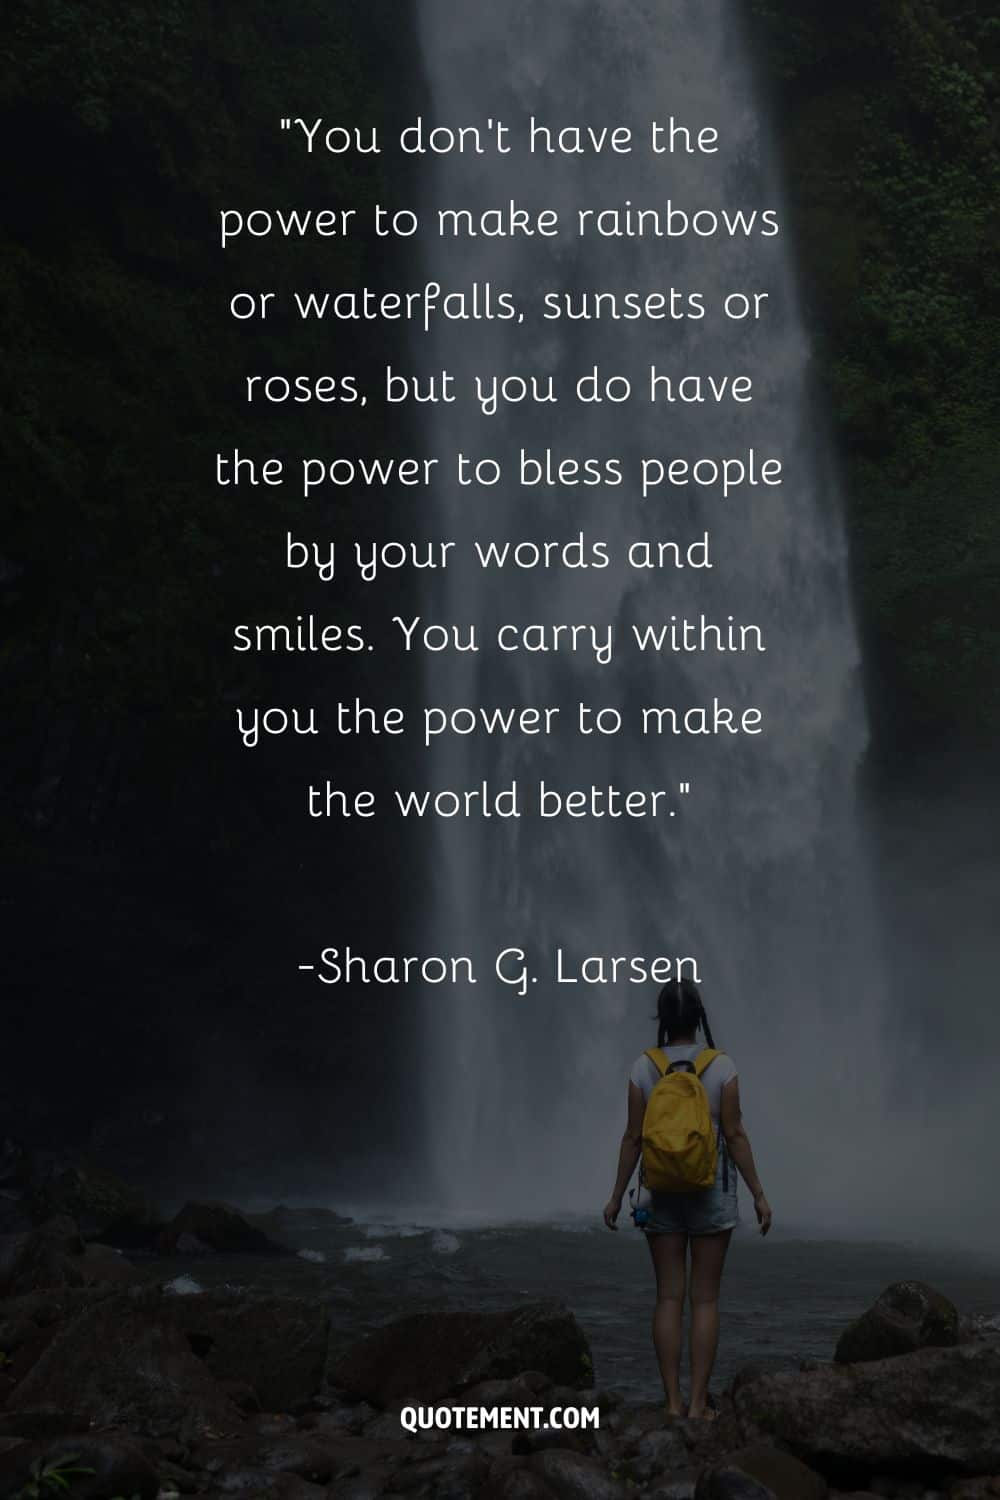 Amazing quote by Sharon G. Larsen and a woman by the waterfall in the background, too
